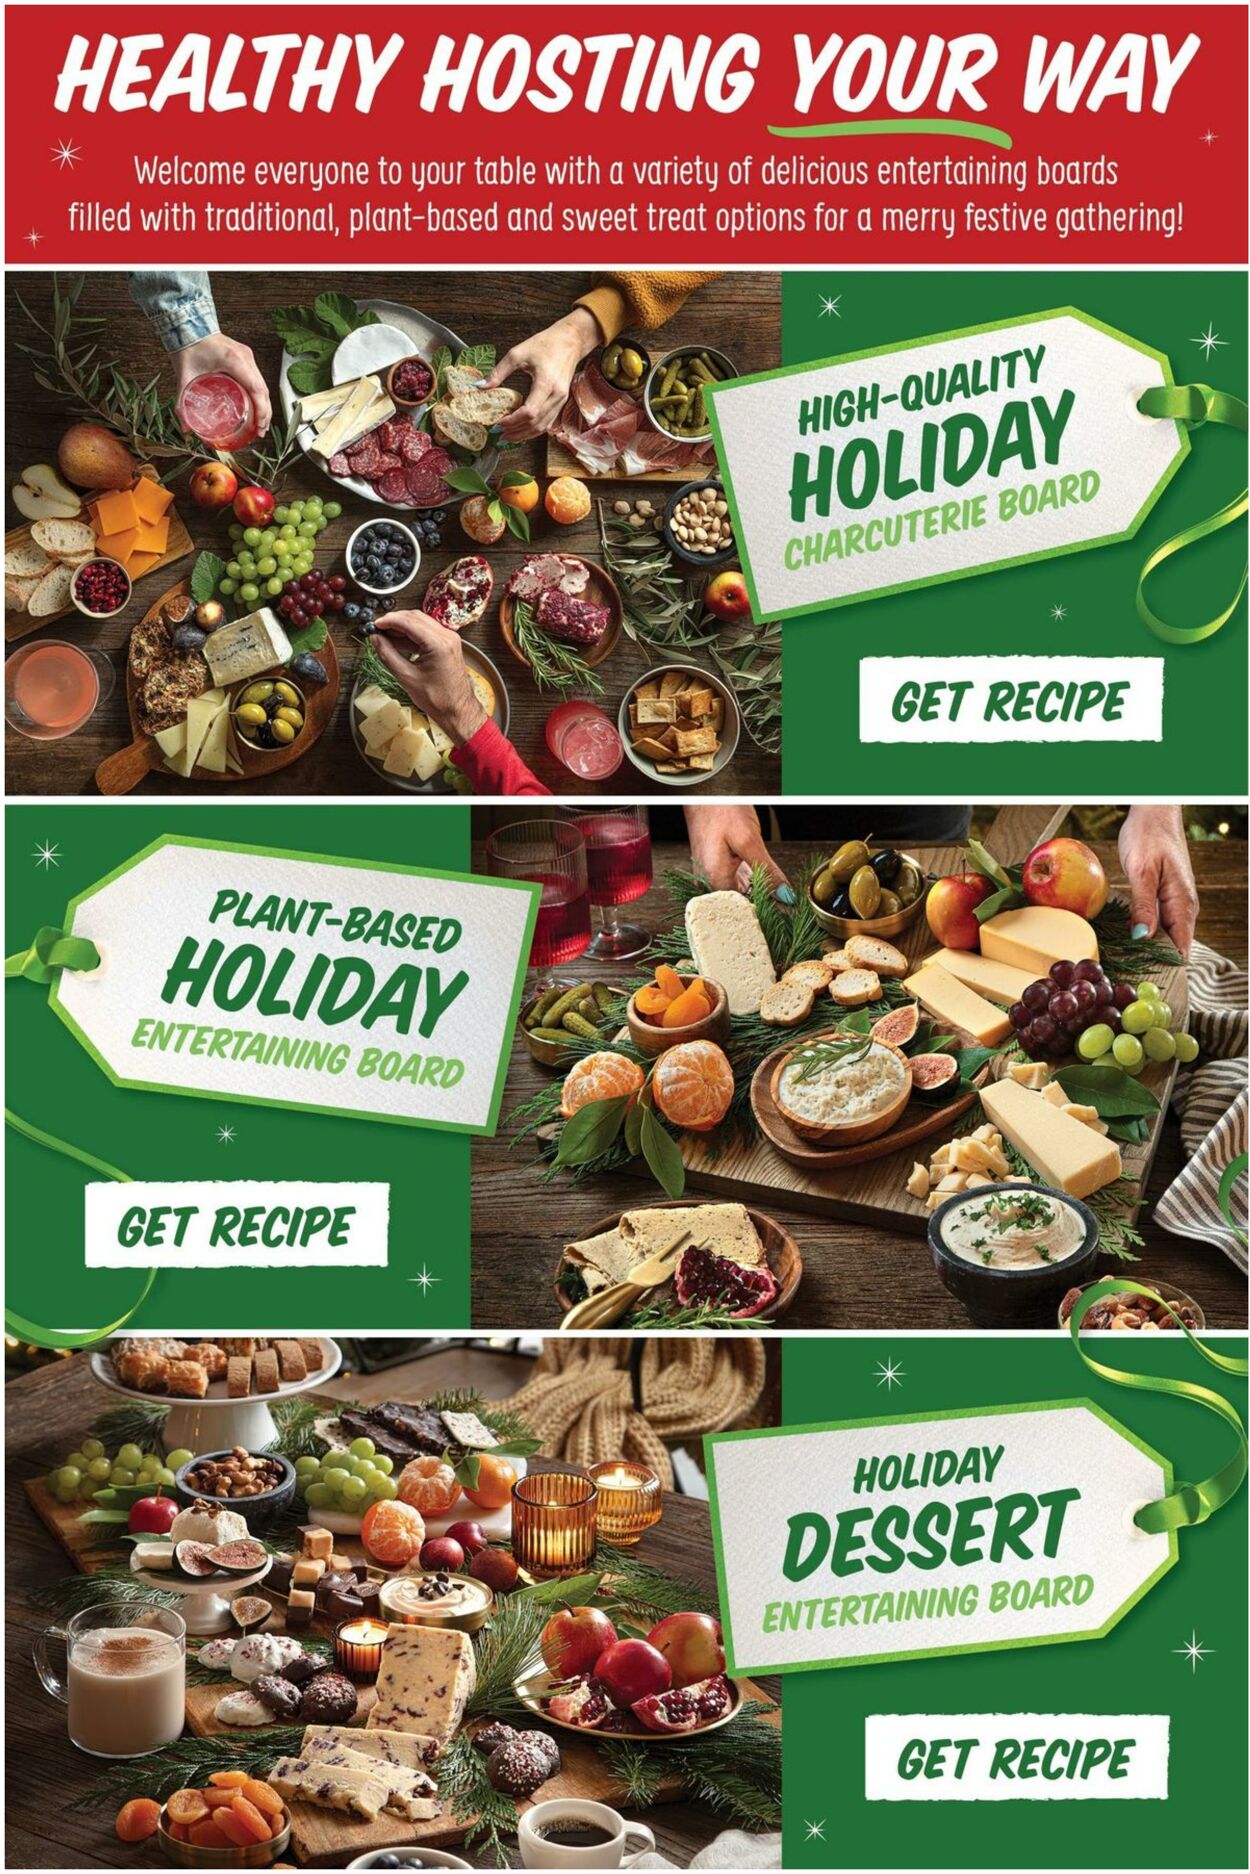 Weekly ad Sprouts 12/06/2023 - 12/12/2023